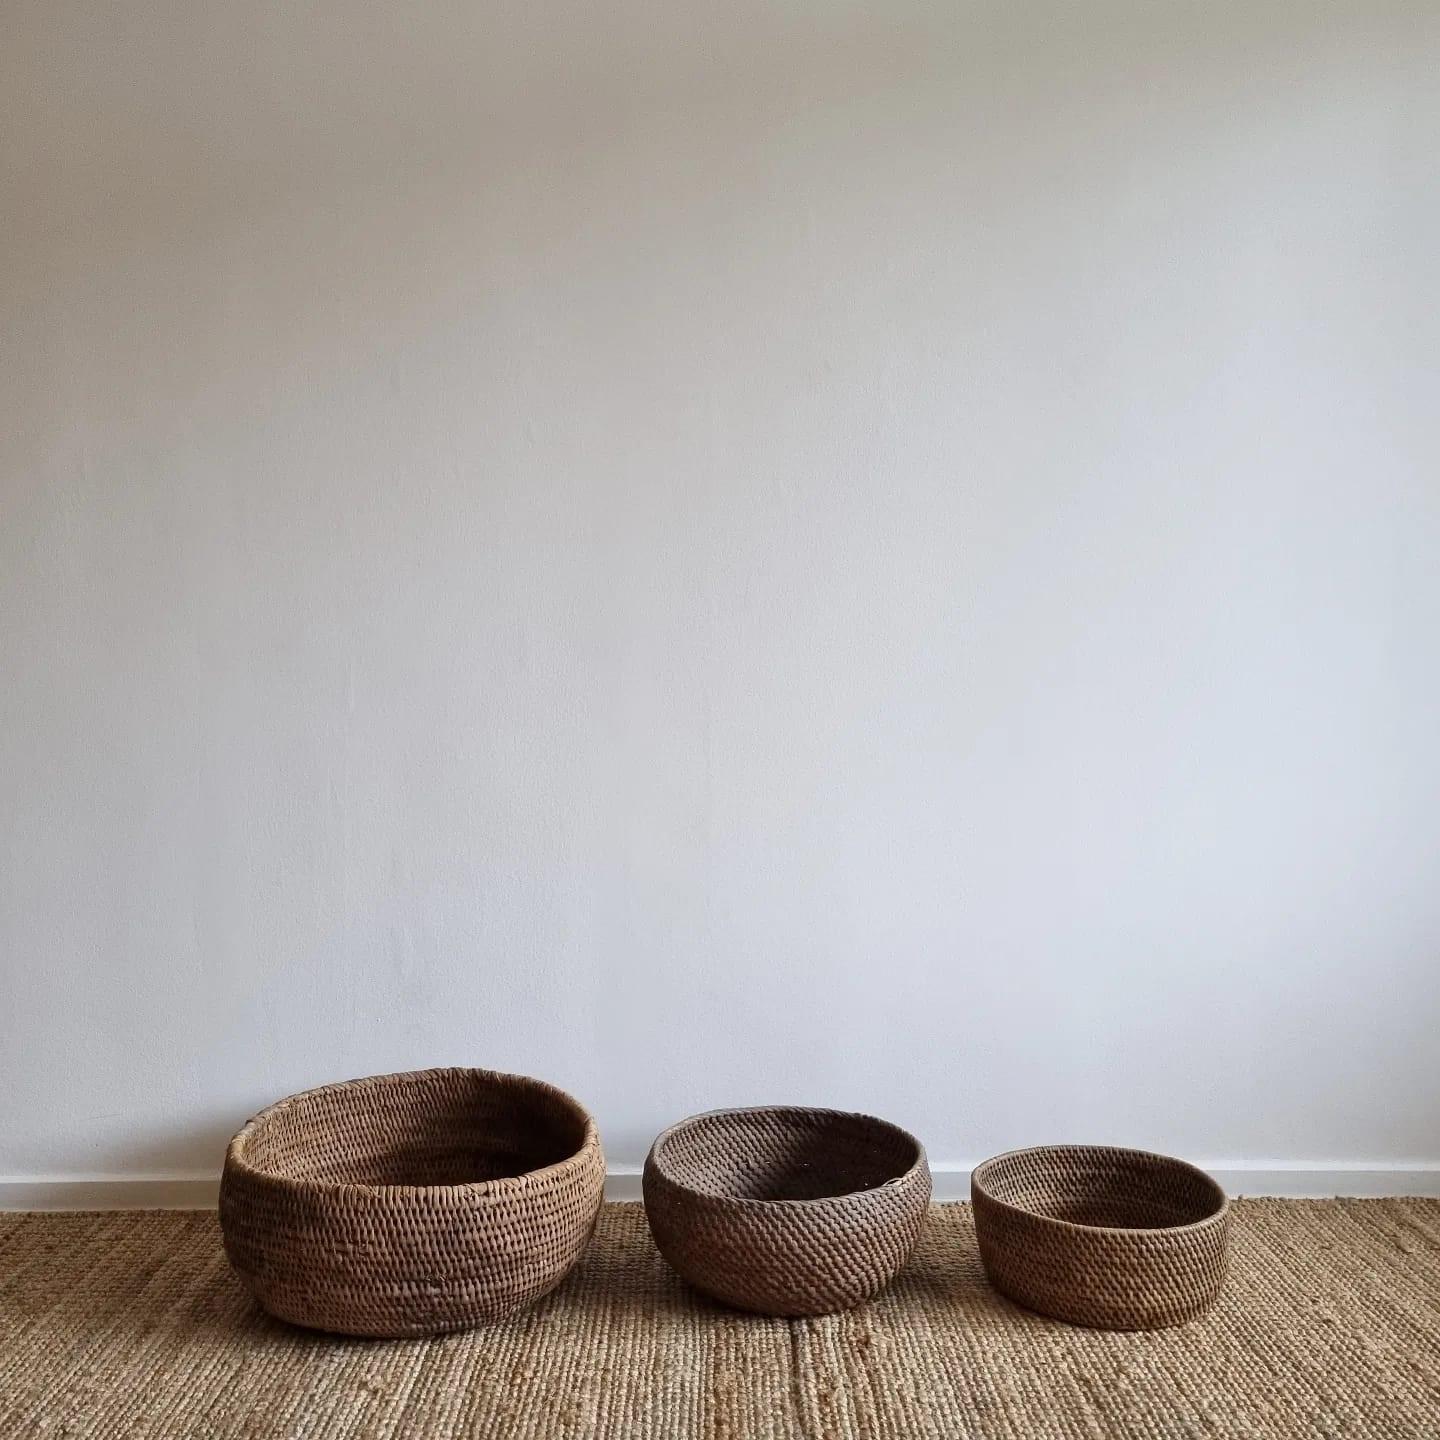 A set of three big swedish root baskets.
Made out of pine roots and spruce, circa 1750-1890

Biggest basket: 
height: 22,5 cm
diameter: 48 cm

Medium basket: 
height: 17,5 cm
diameter: 37 cm

Small basket: 
height: 13 cm
diameter: 31 cm